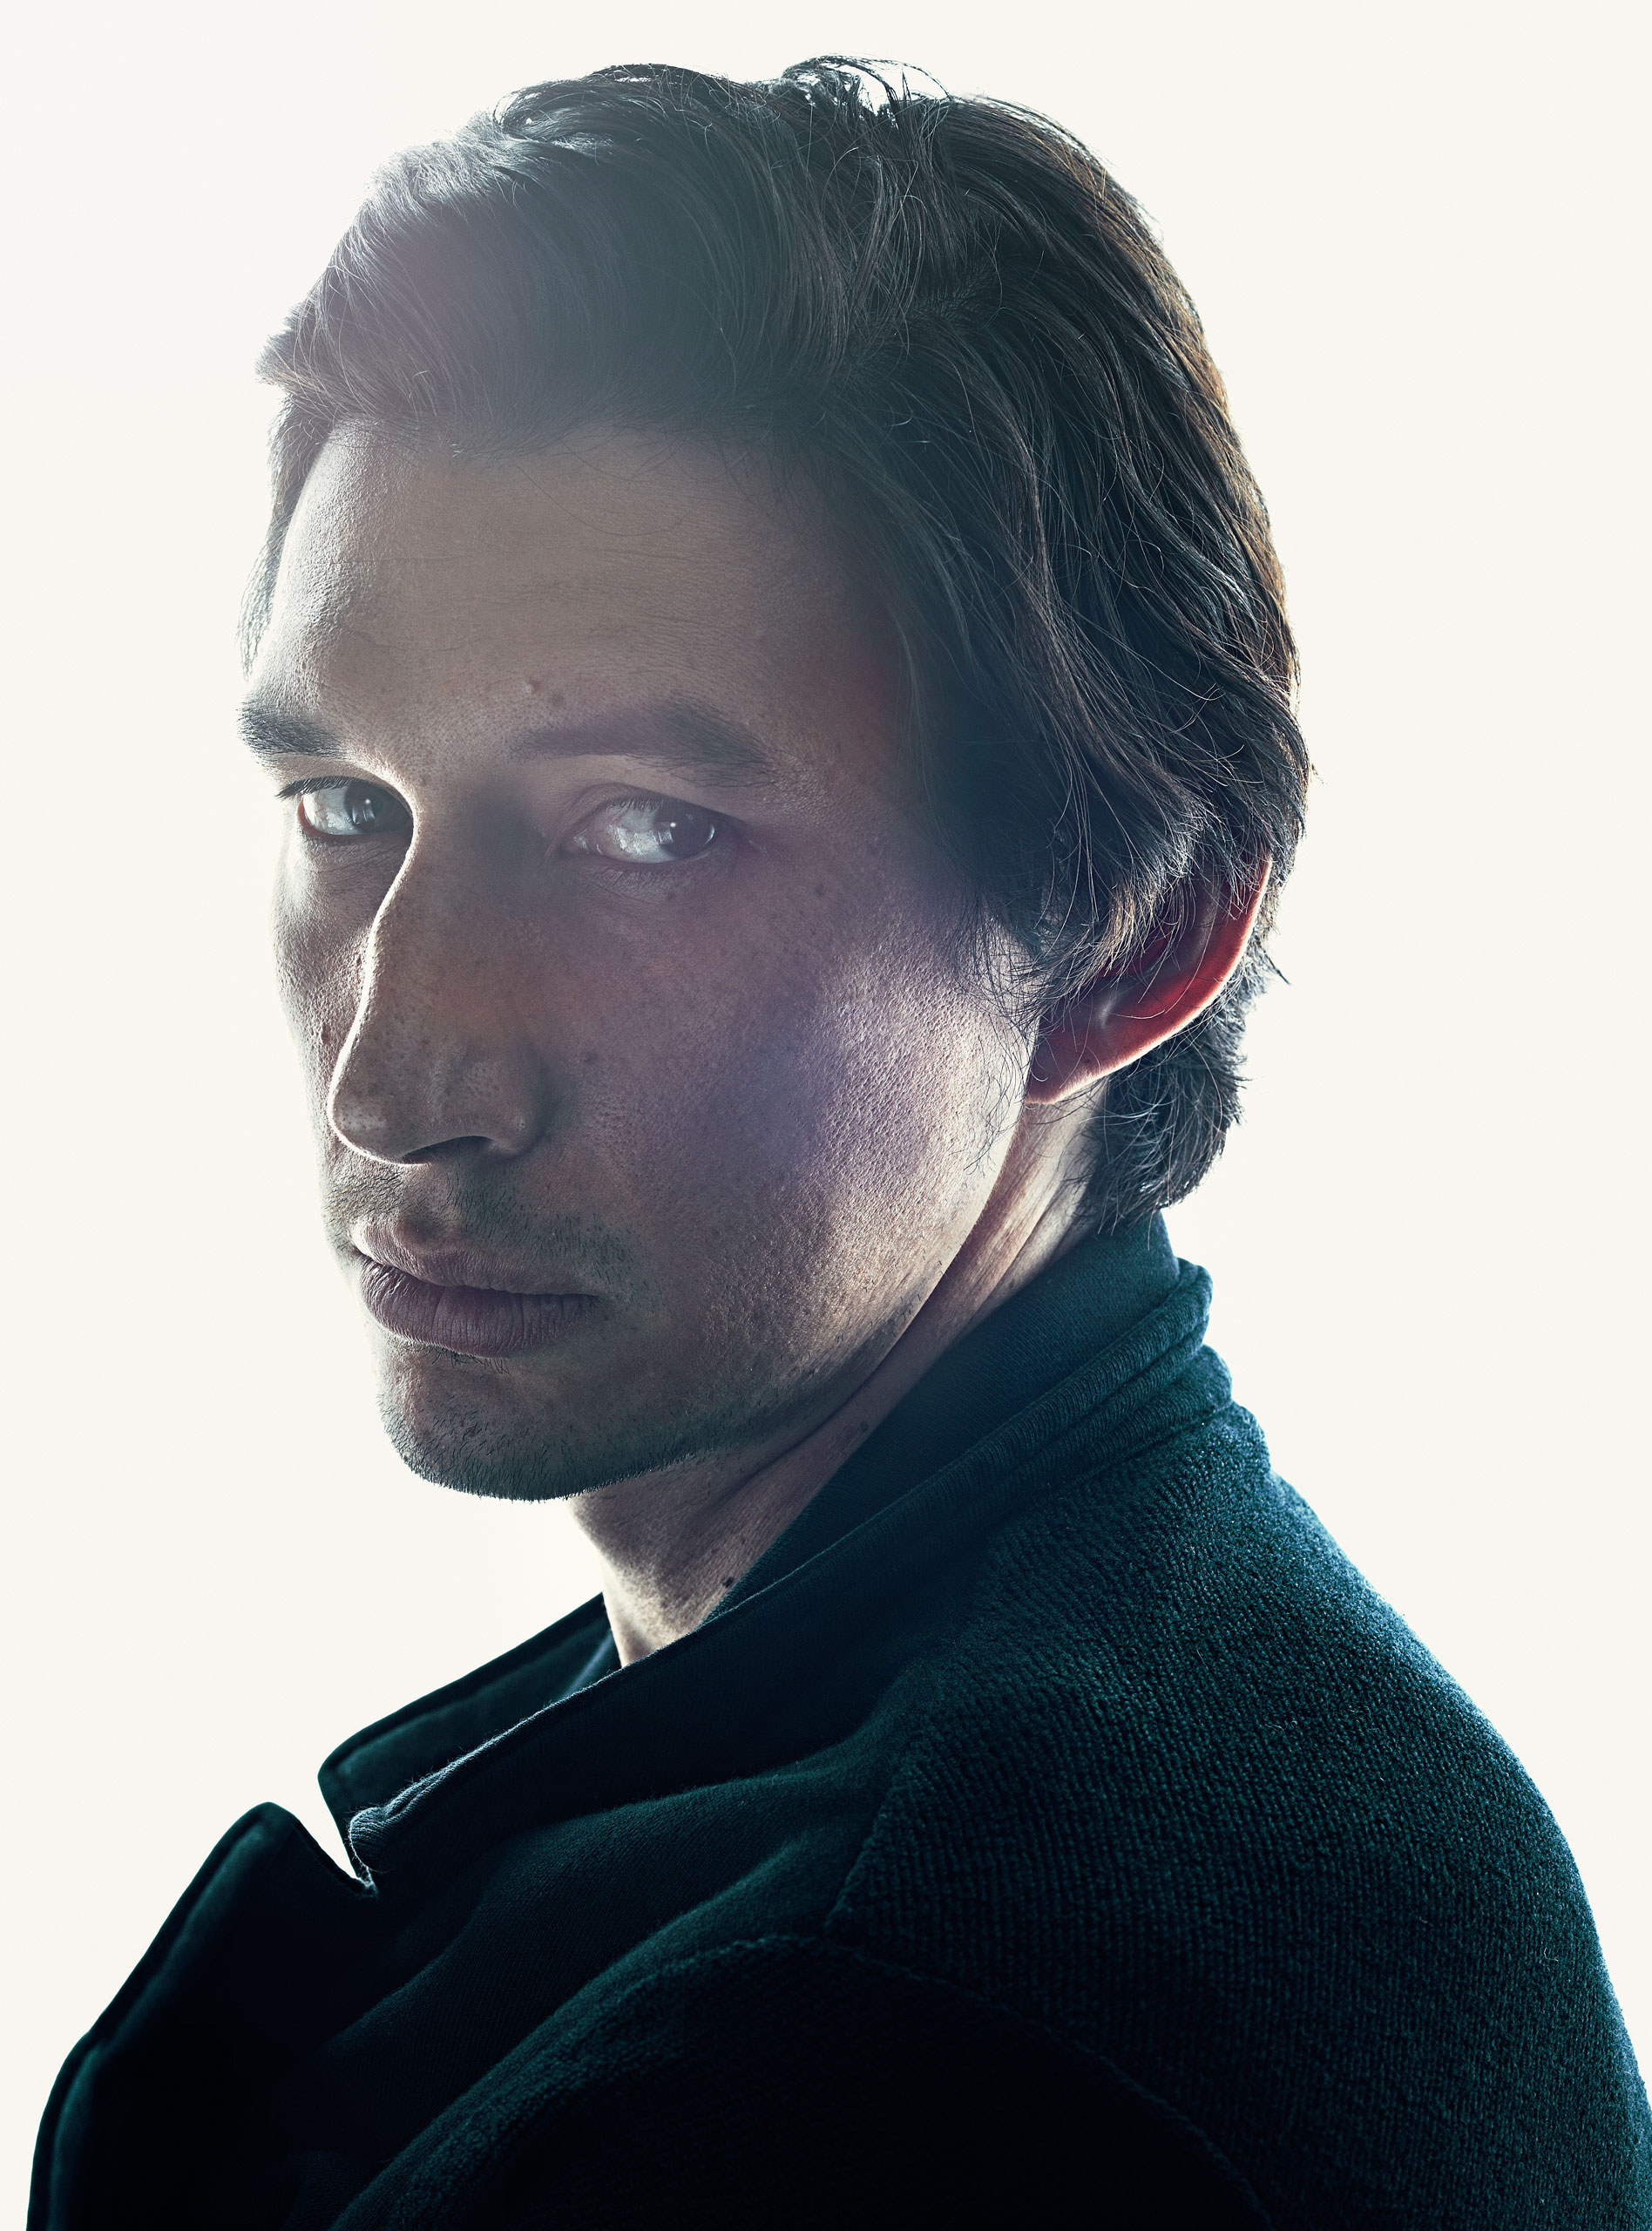 Adam Driver photographed for TIME on October 25, 2015 in New York.